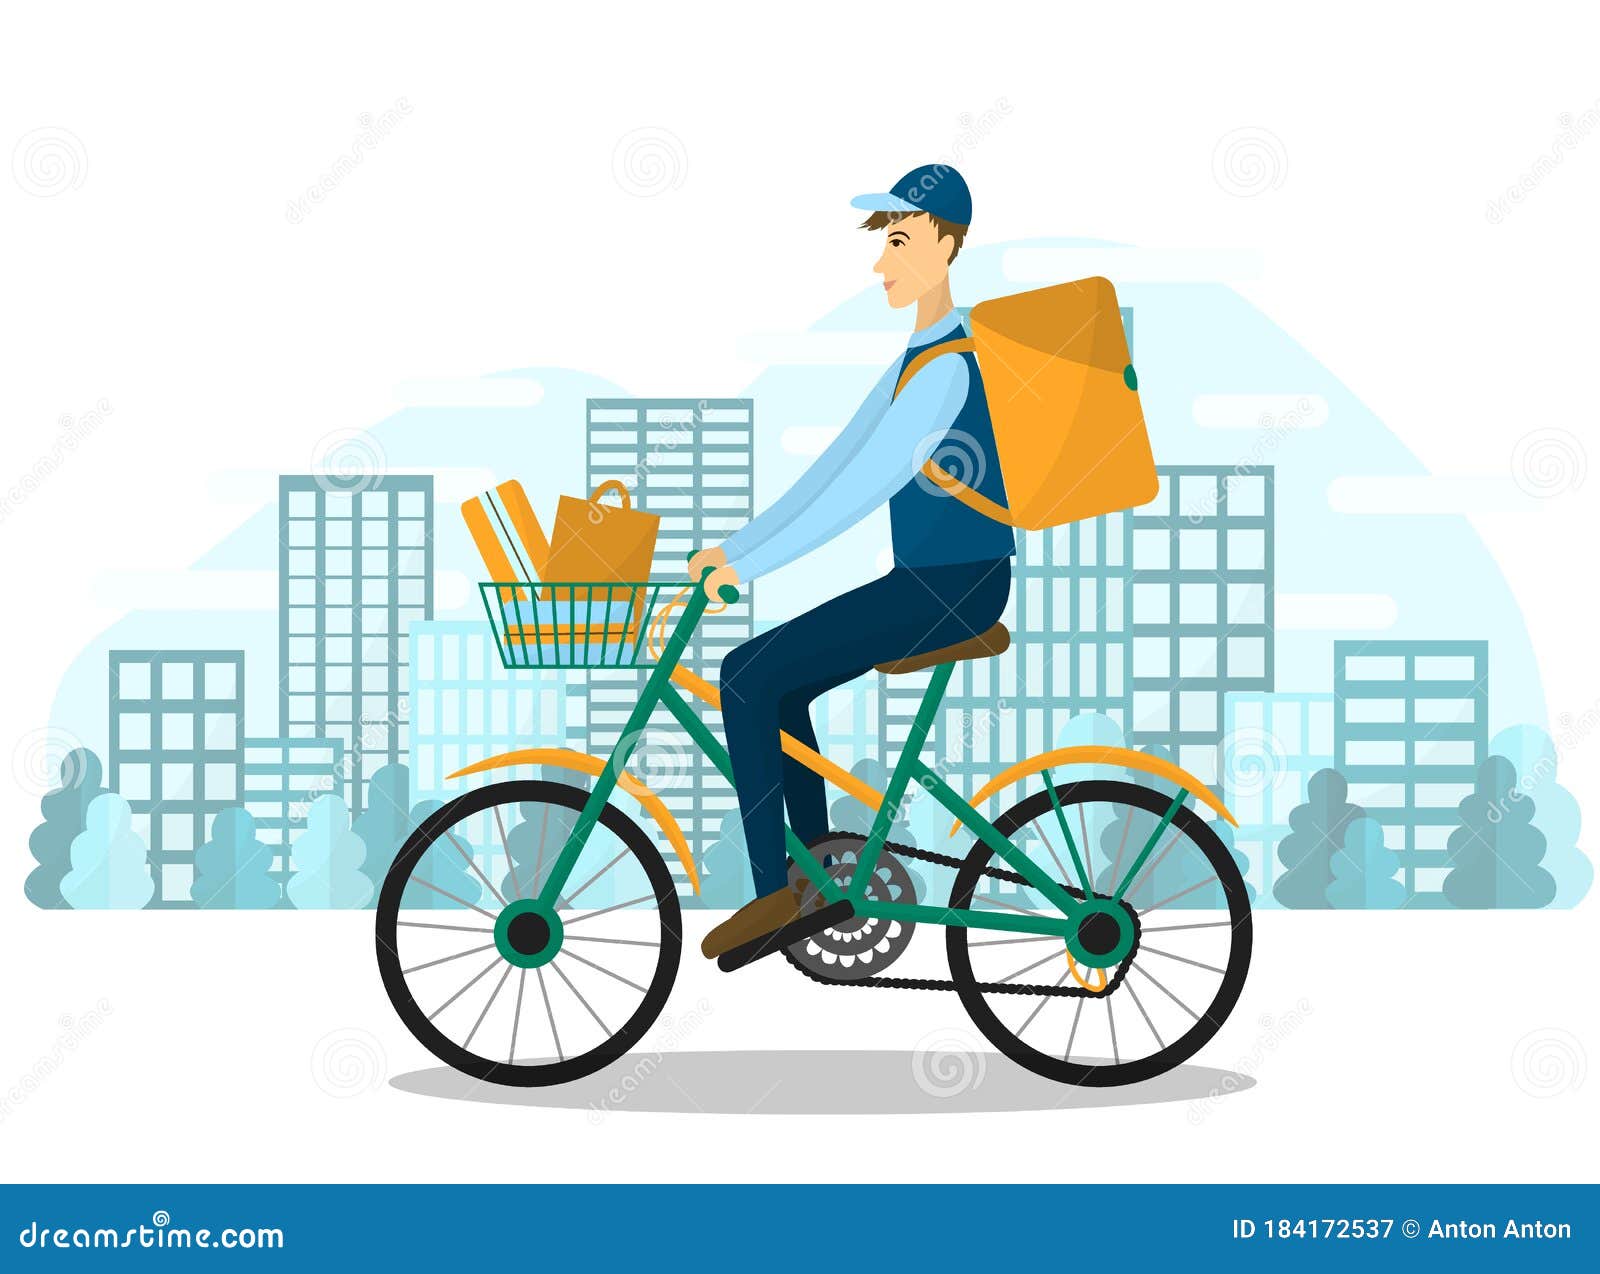 Courier Ride a Bike Vector Image. Driver with an Order on the Bicycle